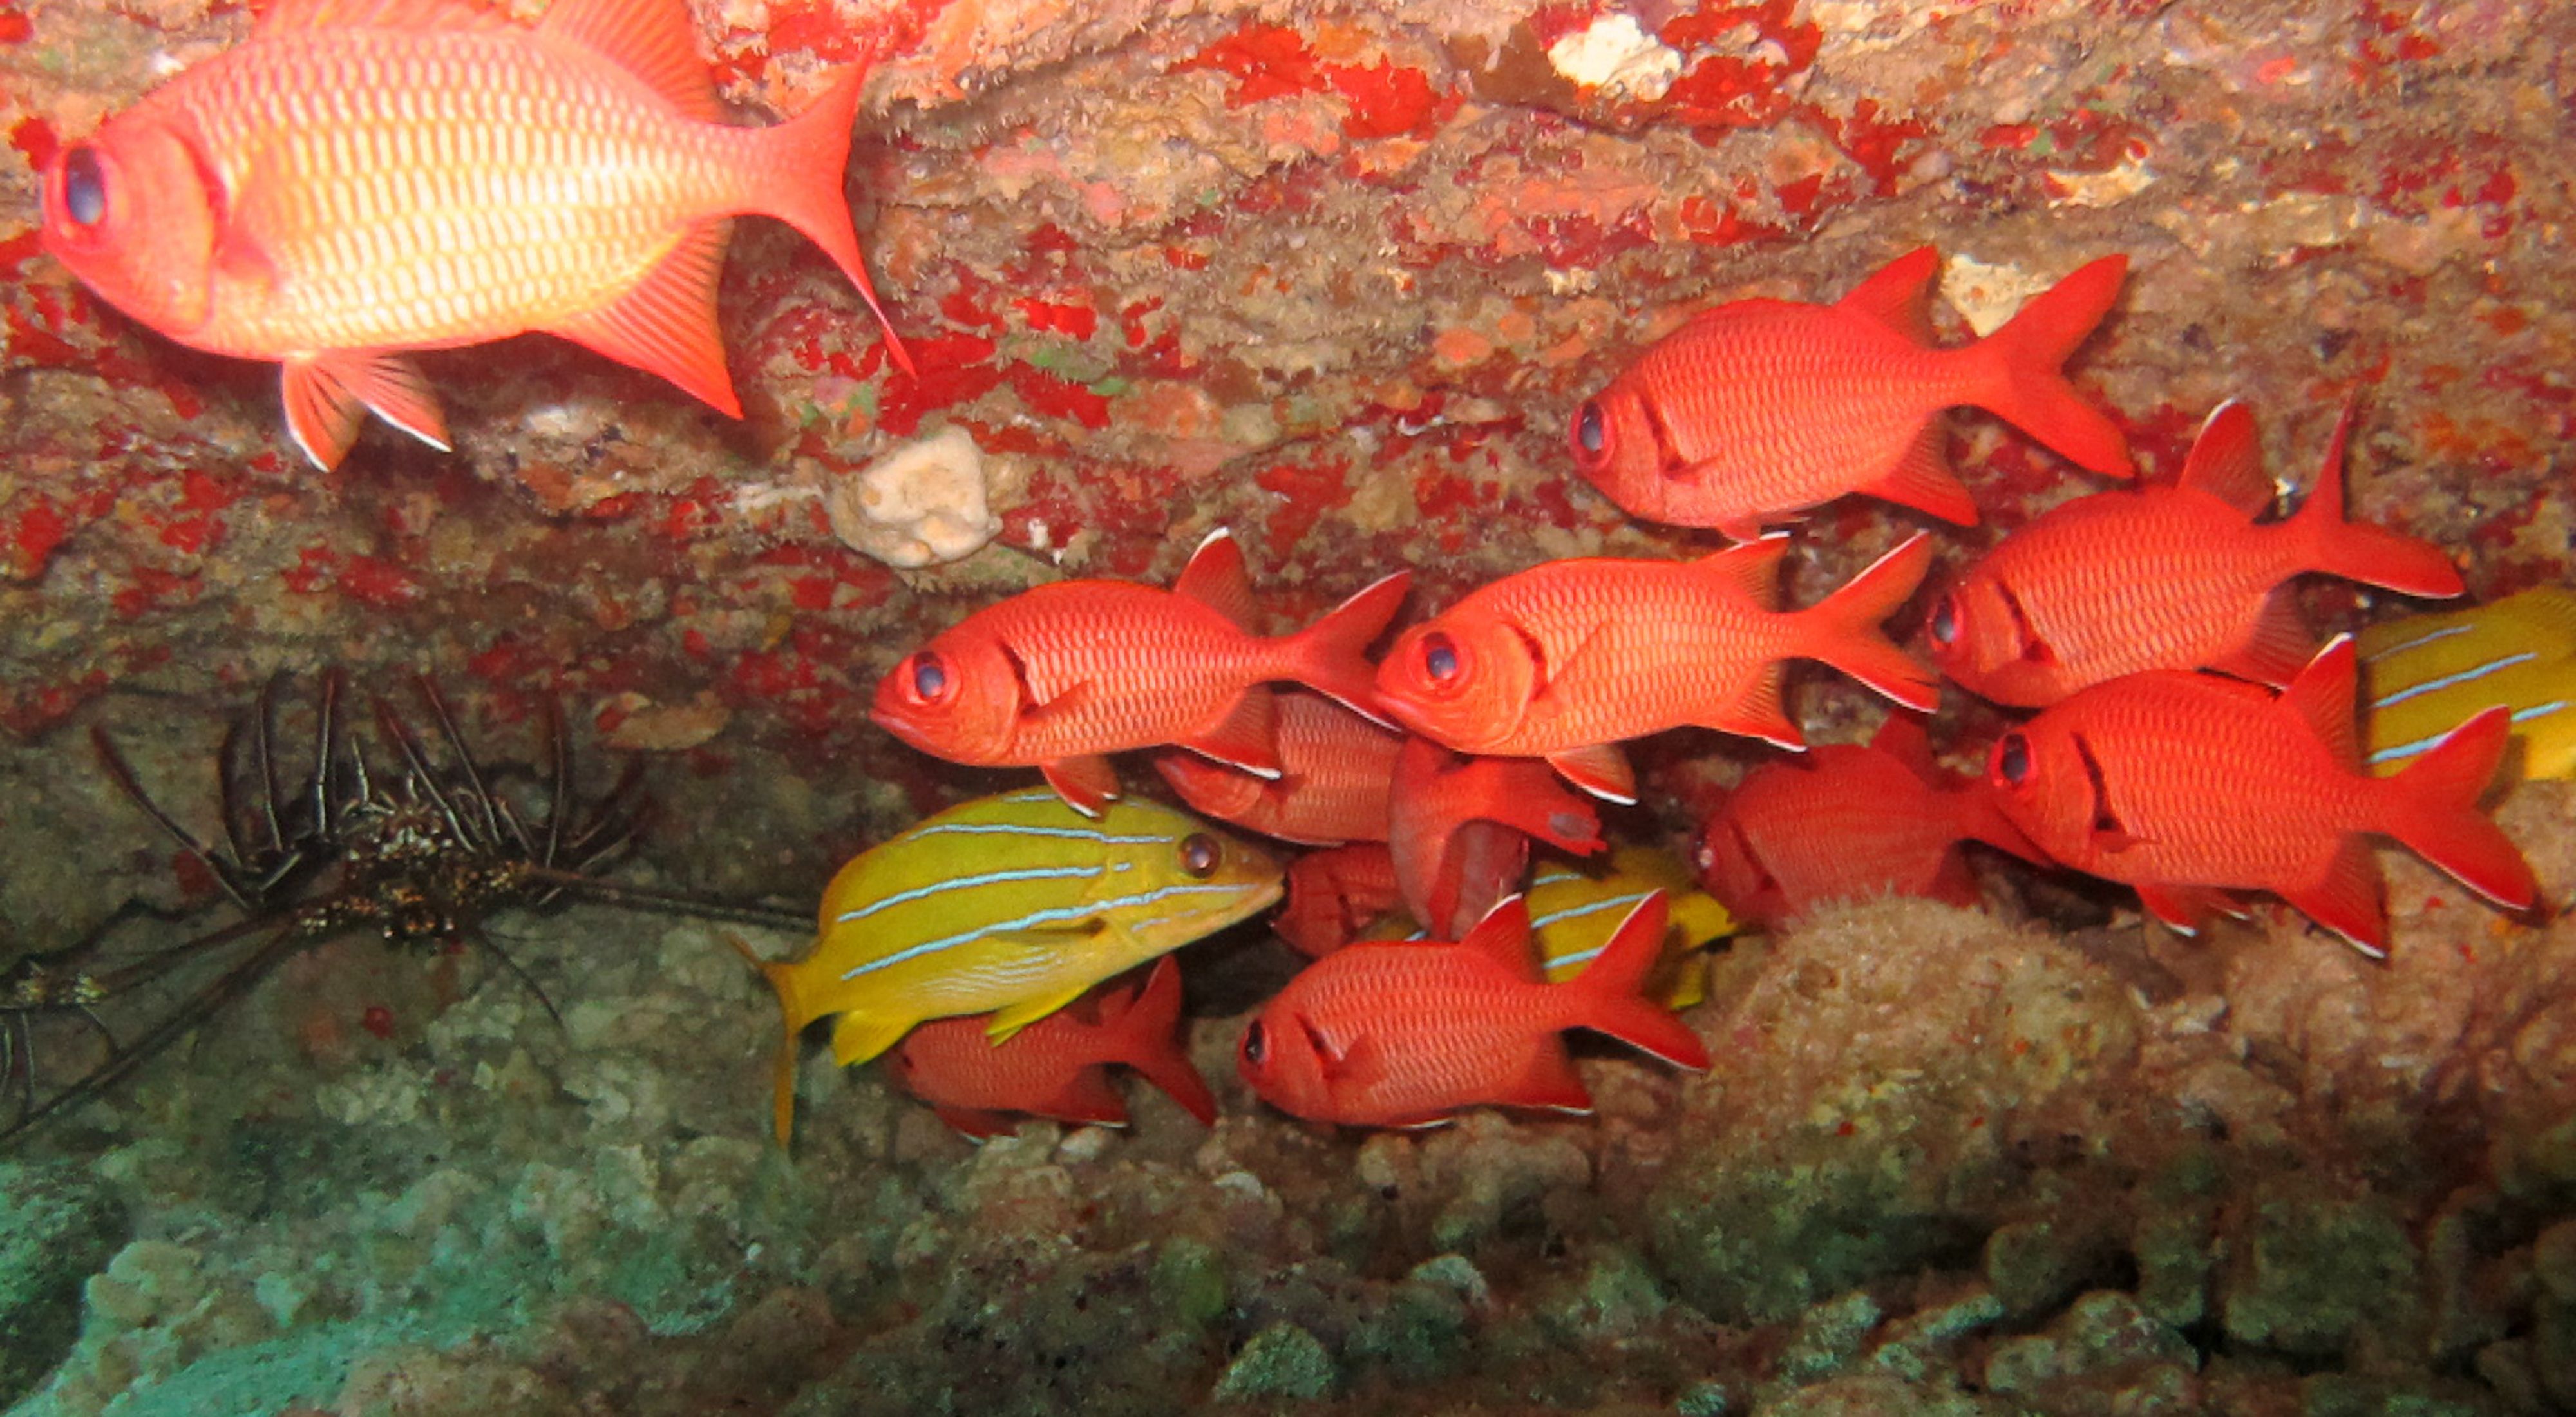 Several bright red-orange fish, a few white-striped yellow fish, and a spiny crab in an underwater cave in the waters of Hawaii.